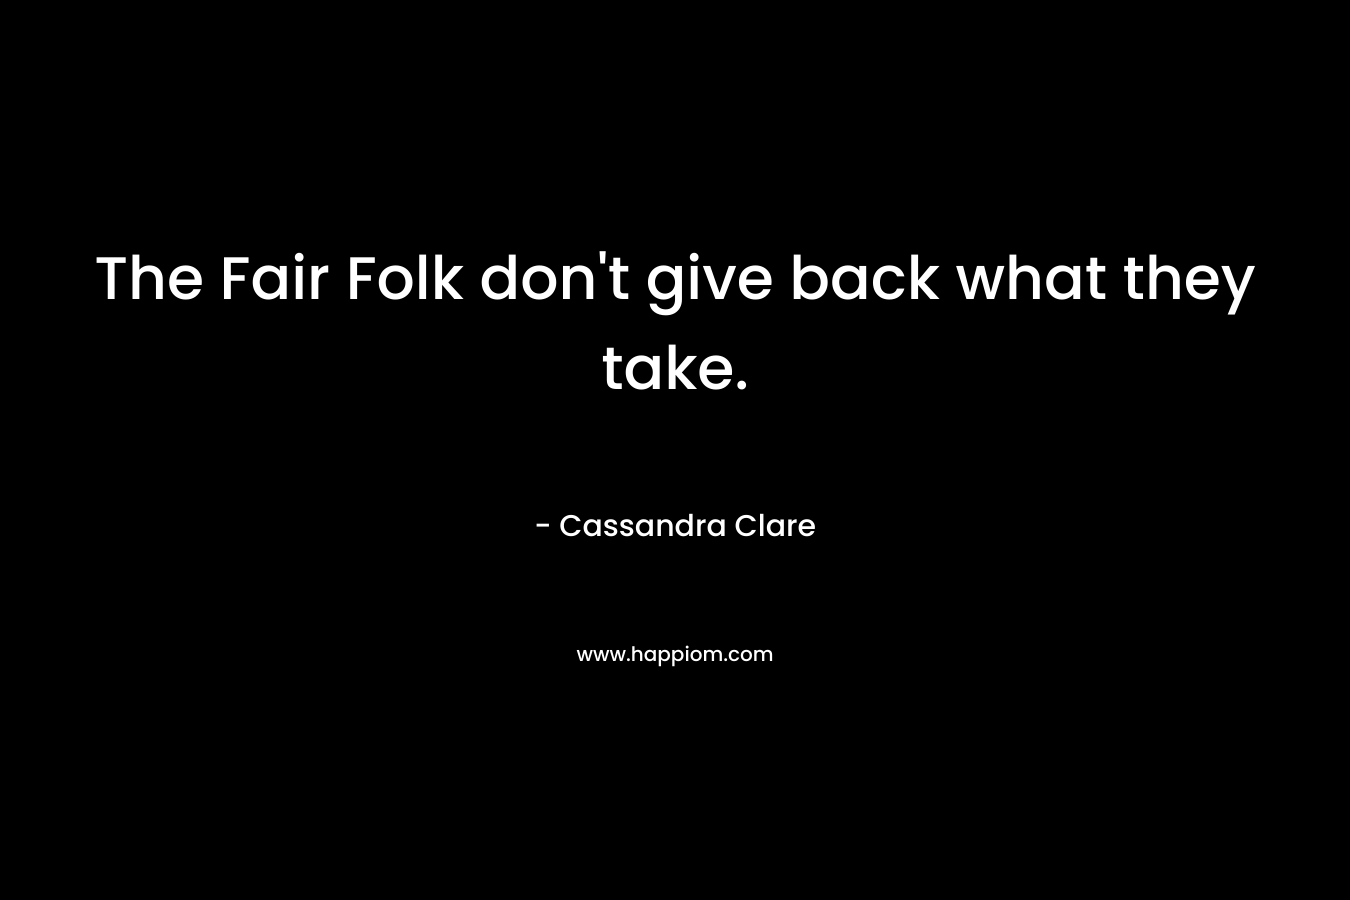 The Fair Folk don’t give back what they take. – Cassandra Clare